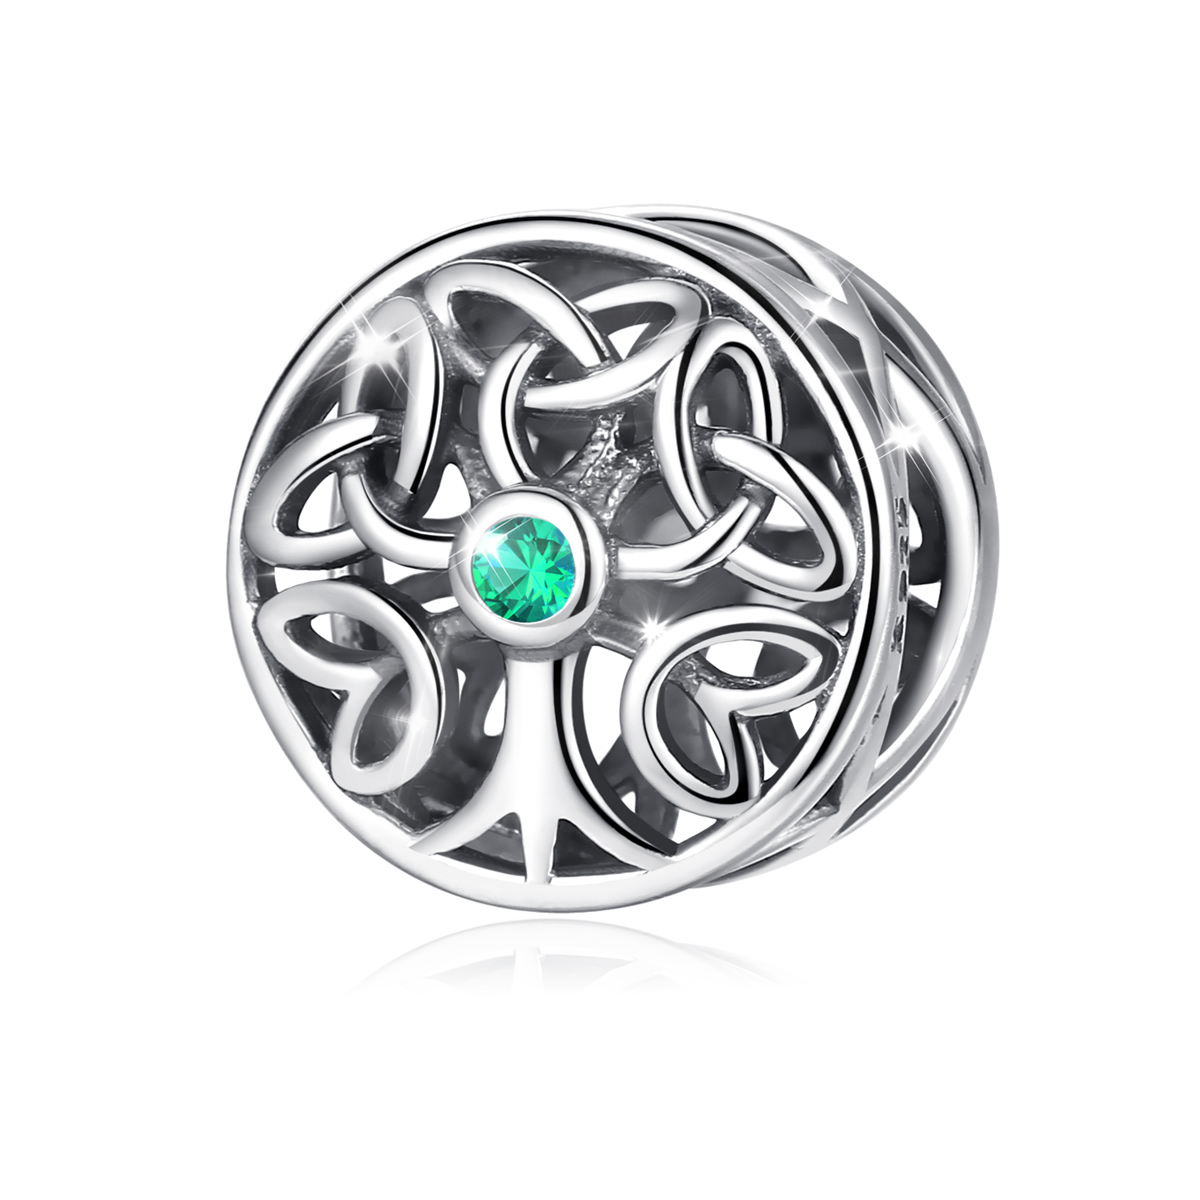 Embrace Nature's Beauty: The Material Vintage Oxidized Celtic Tree of Life Silver Bead